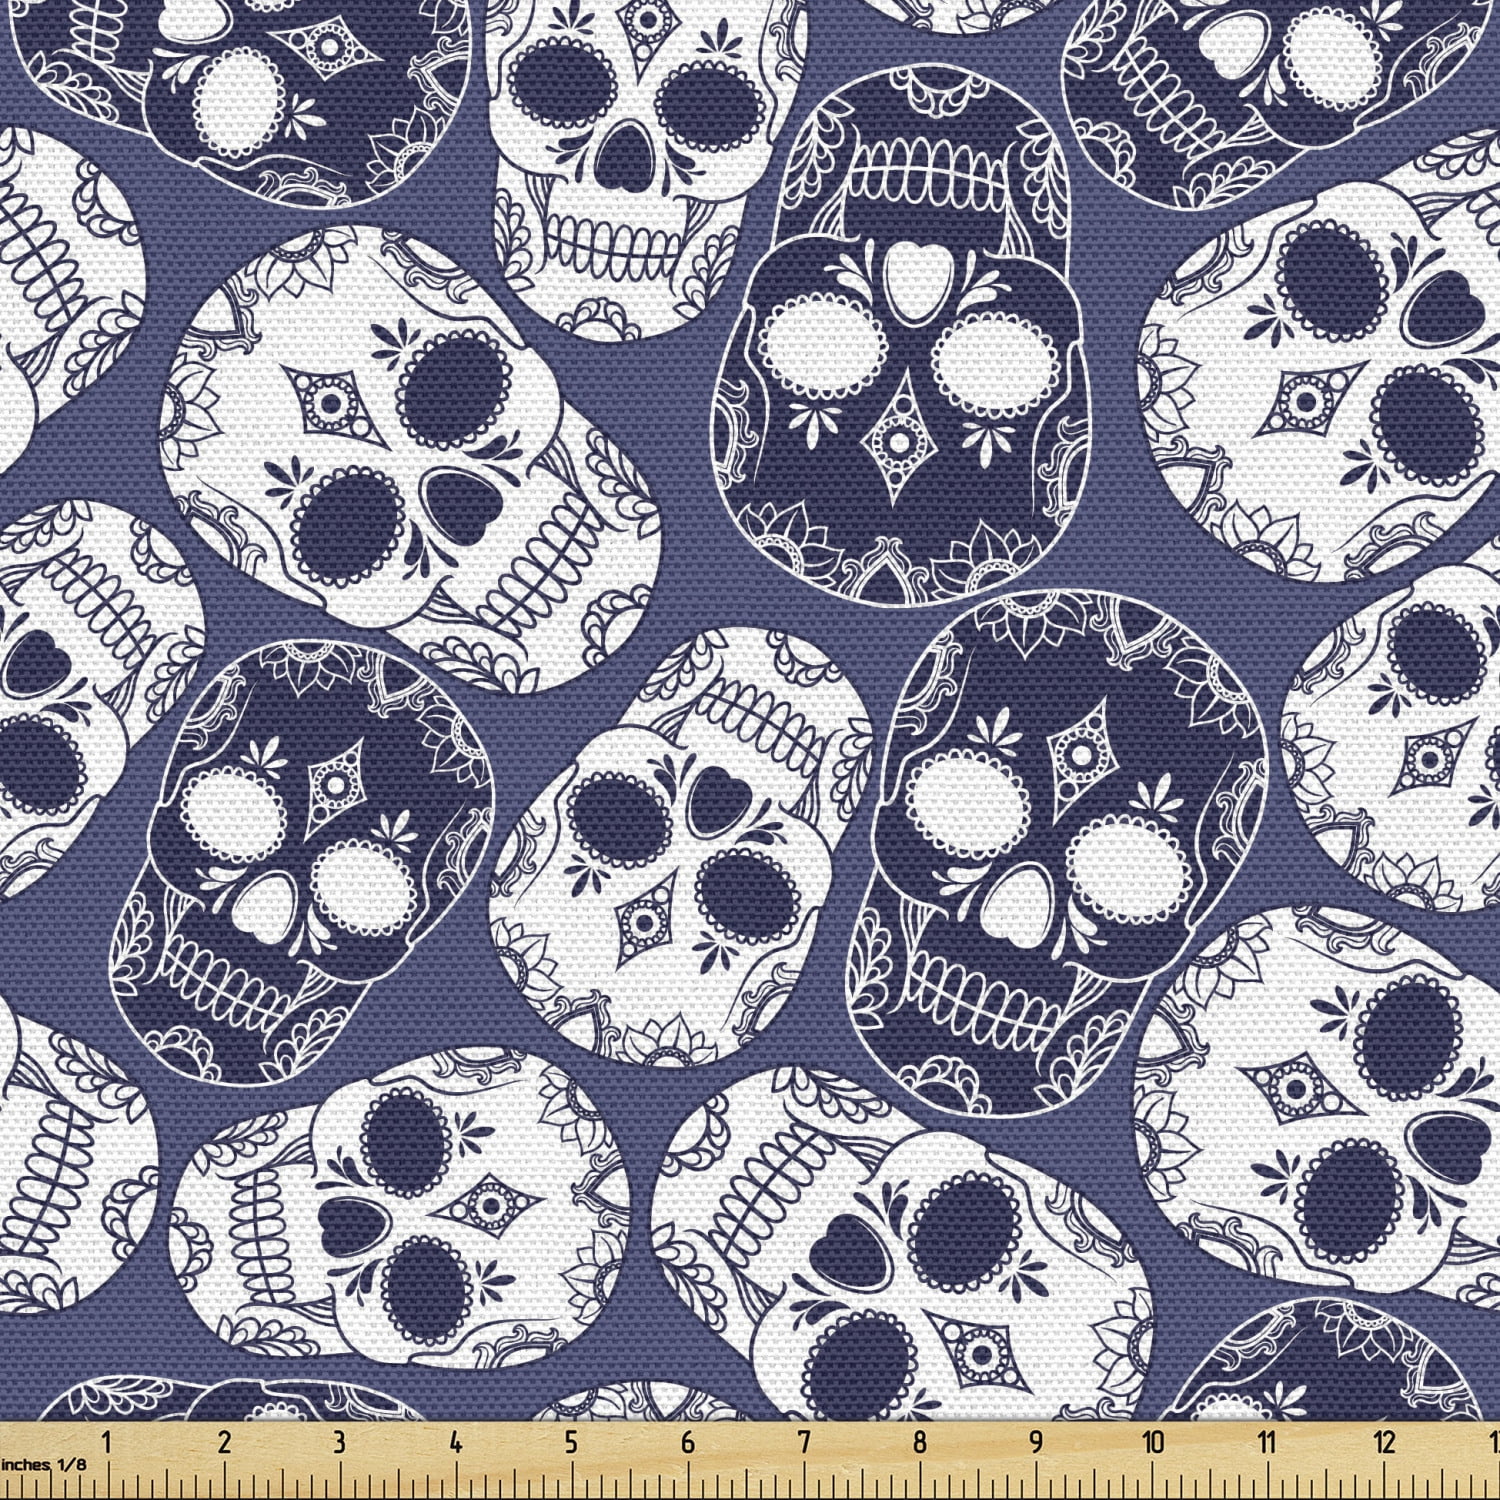 Sewing Halloween Fabric Face Mask By The Yard Pillow Fabric Mini Skulls and Bones Fat Quarter Ships Today